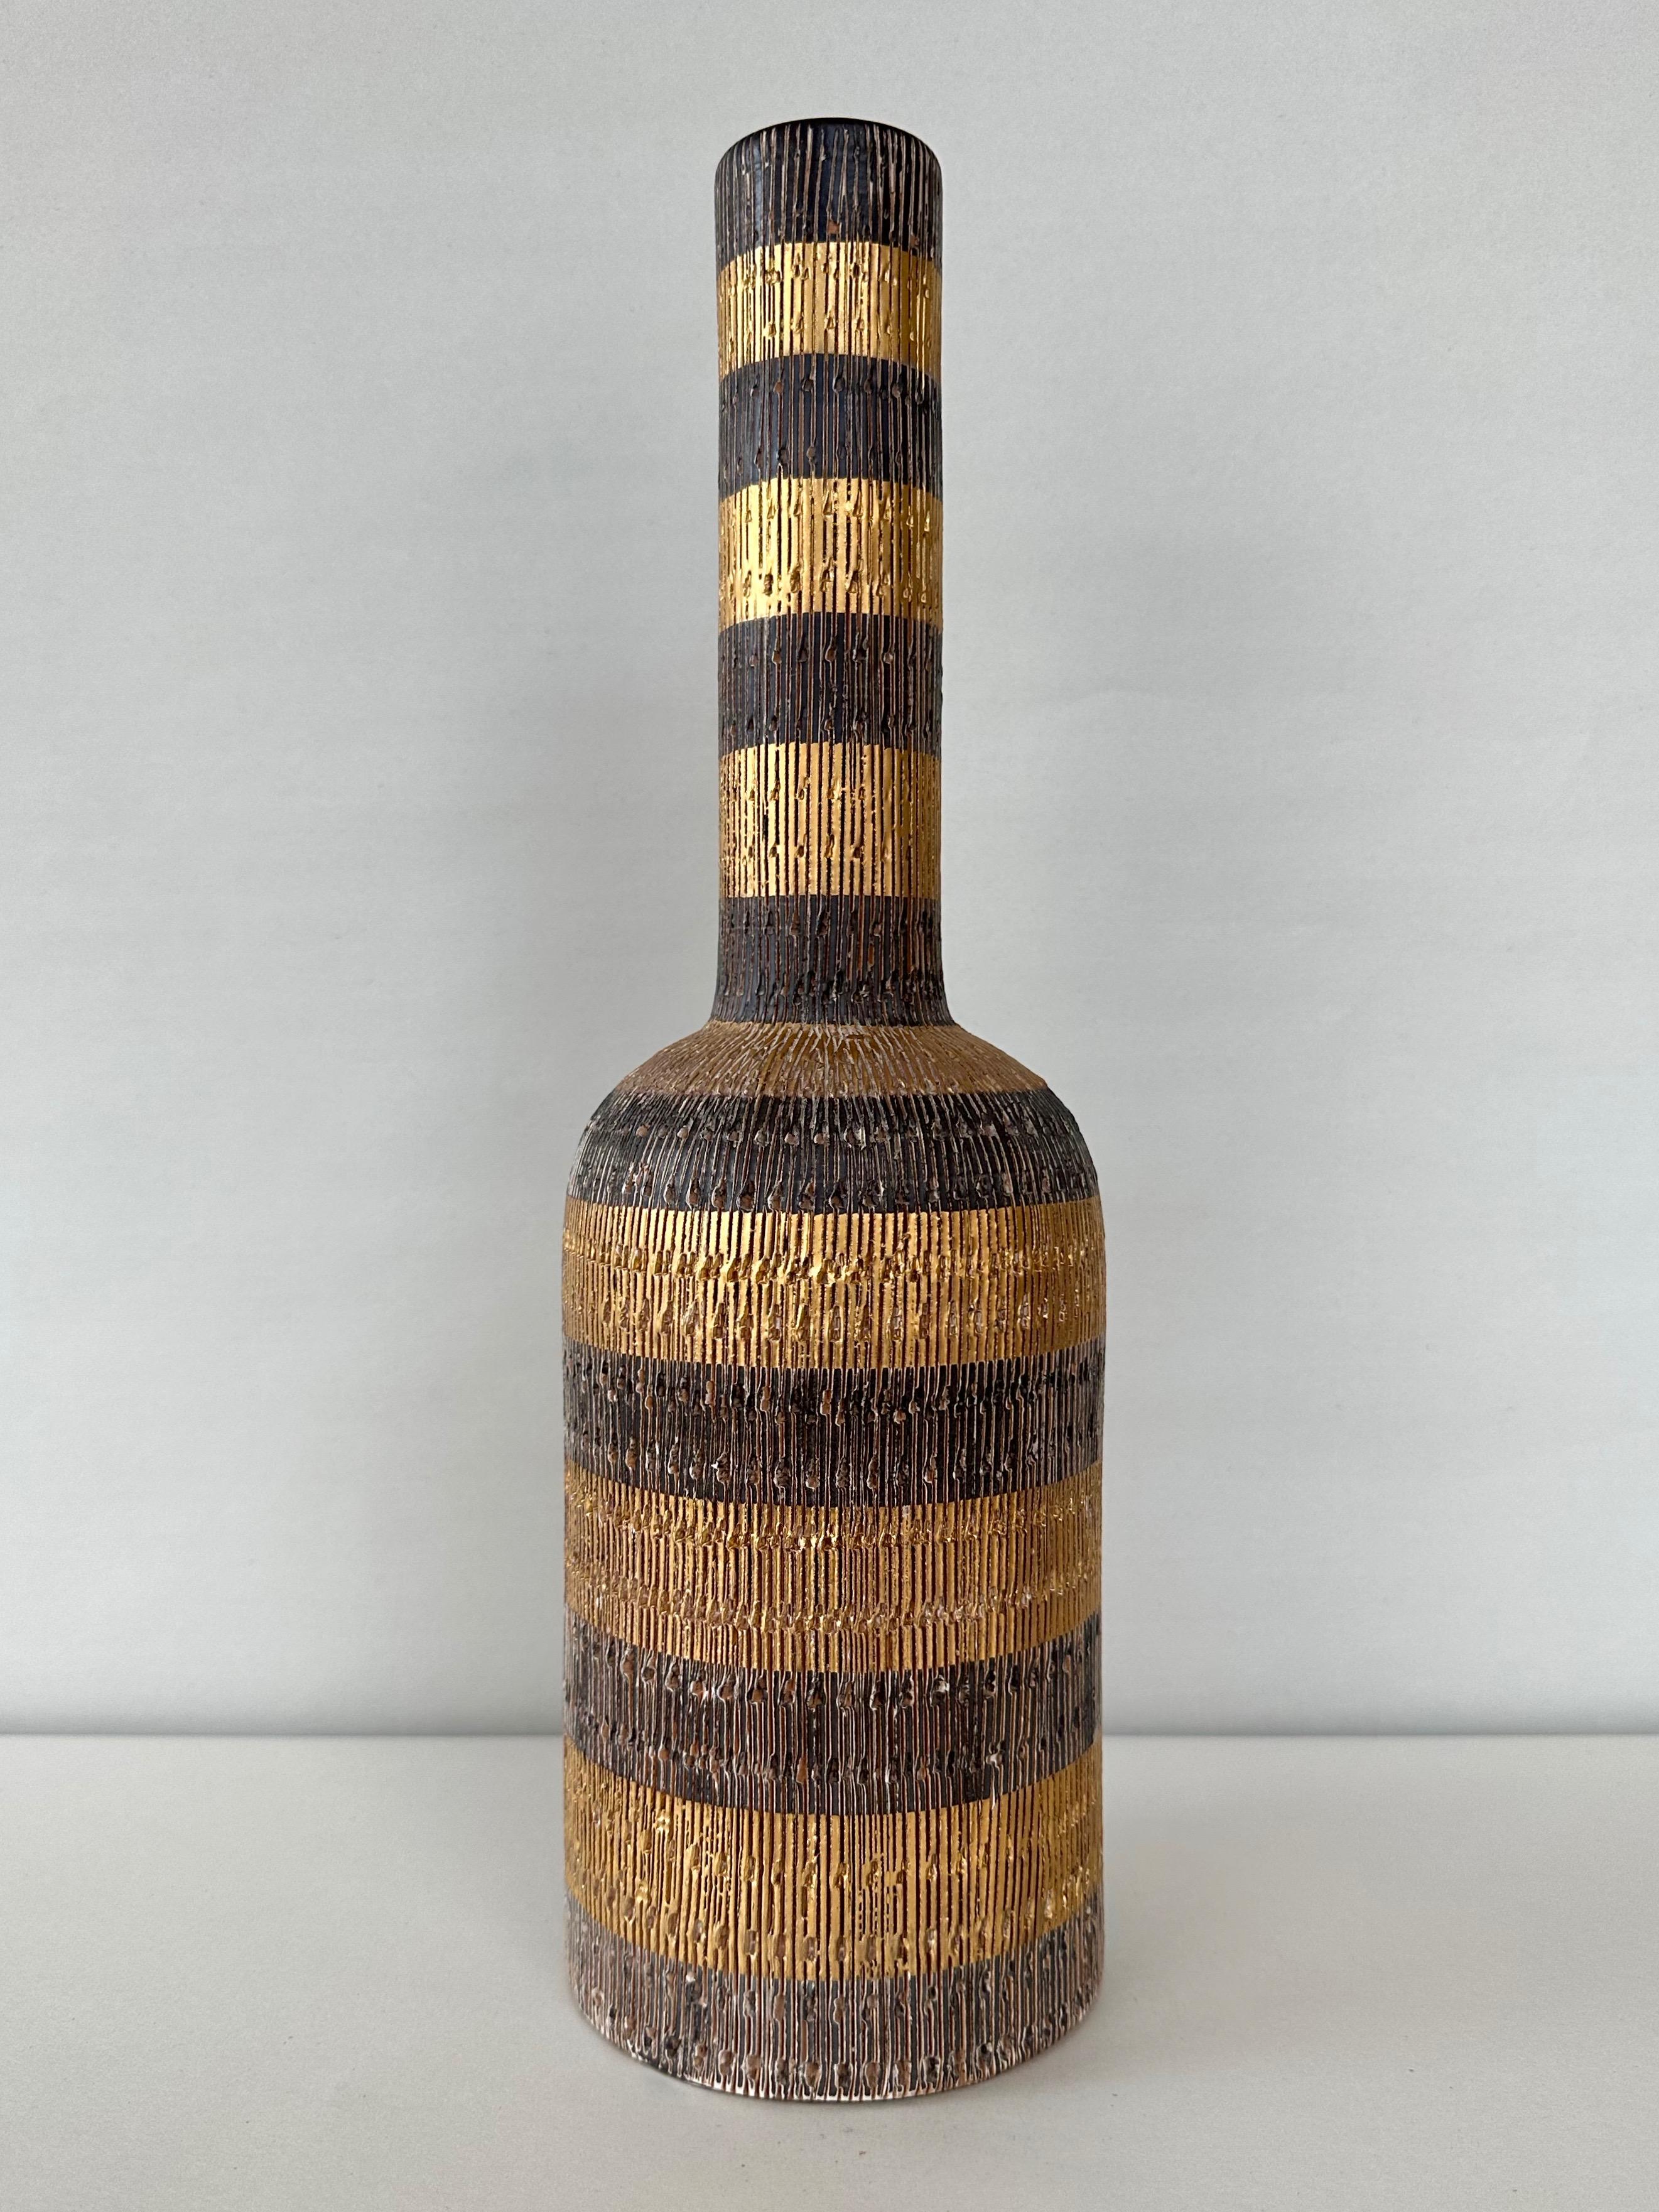 An uncommon 1950s Italian tall bottle-shaped Seta vase by Aldo Londi for Bitossi and retailed by Raymor.

Very handsome alternating bands of satin metallic gold and matte dark coffee glaze over a hand-incised brown pottery body. Bands are notable